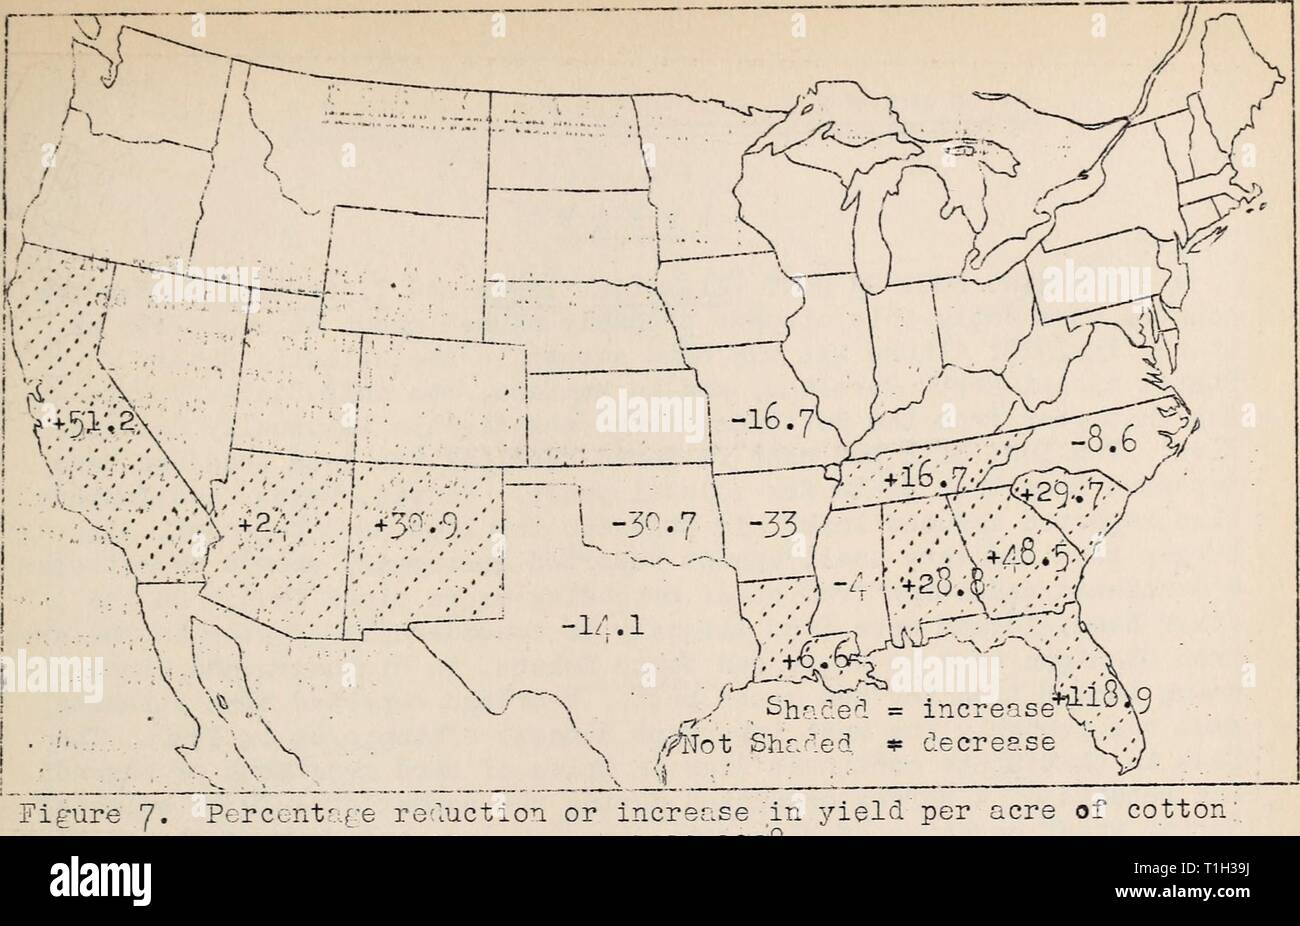 Diseases of plants in the Diseases of plants in the United States in 1930  diseasesofplants81barr Year: 1931  A2    in lg'O from average yield per cere I515-I520. Losses from disease were generally mucji less than norm? 1 in 193r'» Outstanding examples are stem rust, leaf rust, and scab of smell grr.ins, potato late blight except in Florida, Septoria blight of tomatoes, apple sceb in the drought area, and peach brown rot. others Trill be noted in the summary. Certain diseases, however, showed increased destructiveness. These include, naturally, pot-to tipburn rnd blossom-end rot of tomato, and Stock Photo